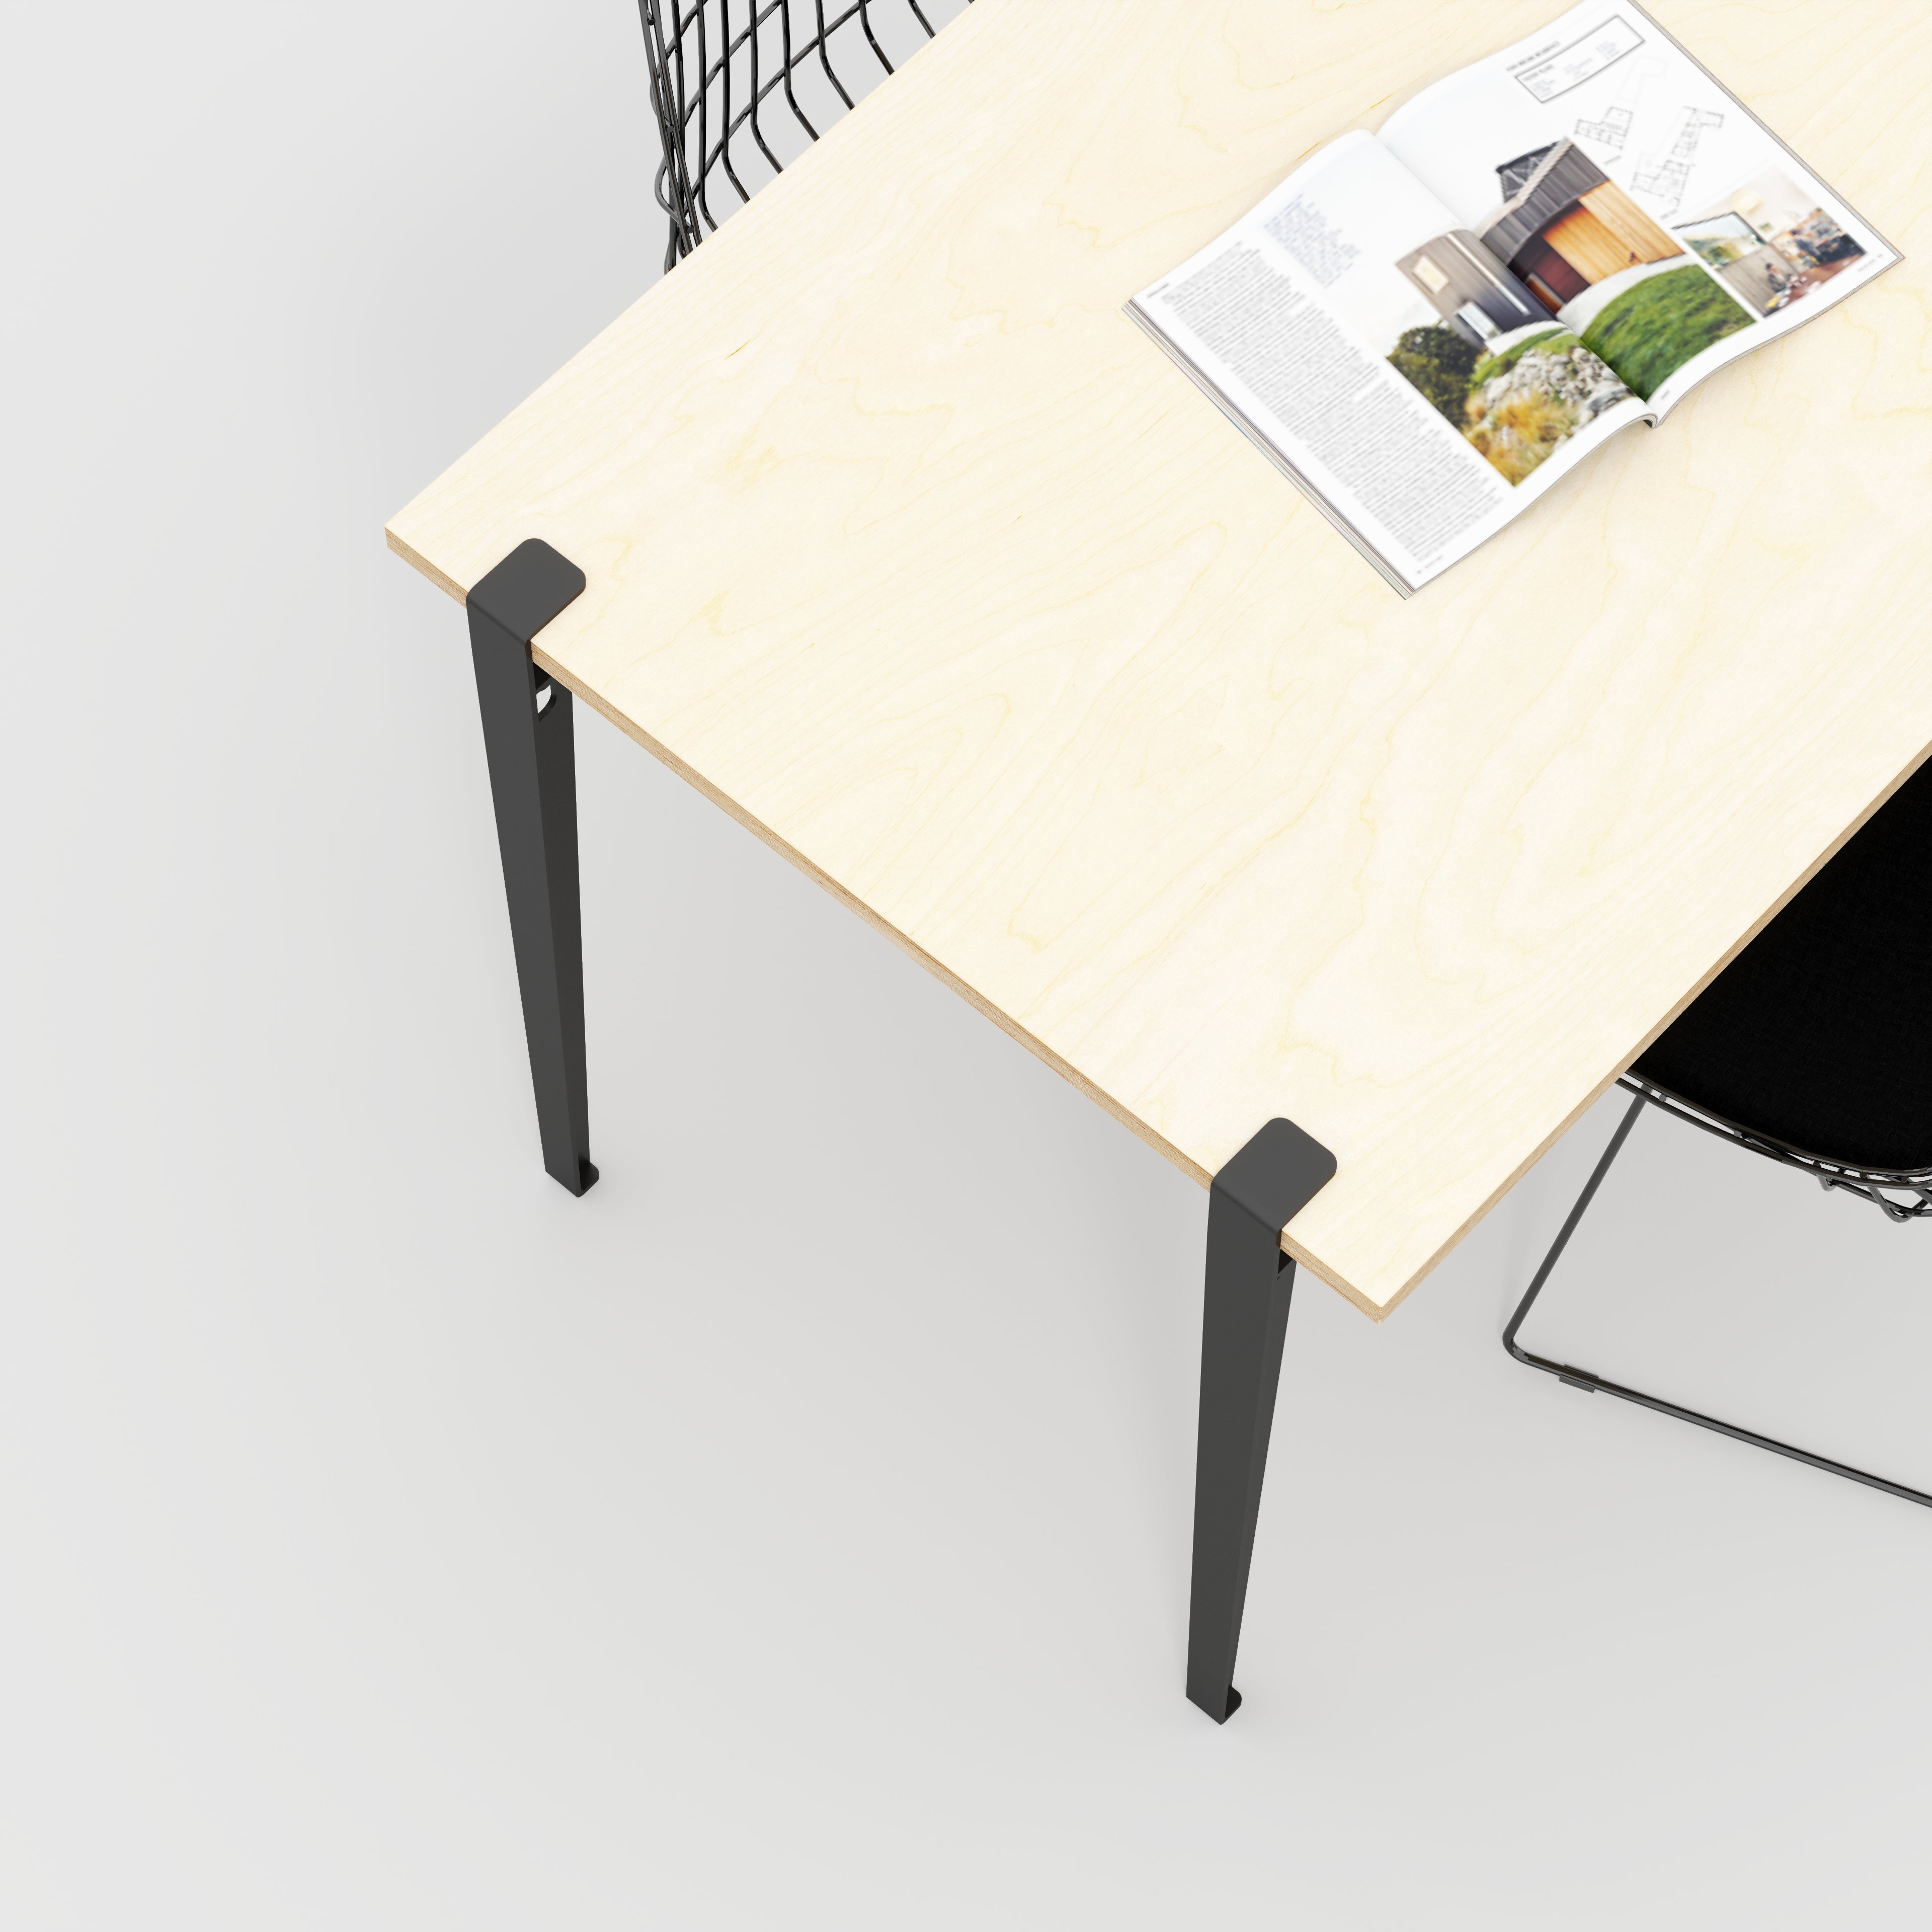 Custom Plywood Wall Table with Tiptoe Legs and Wall Brackets